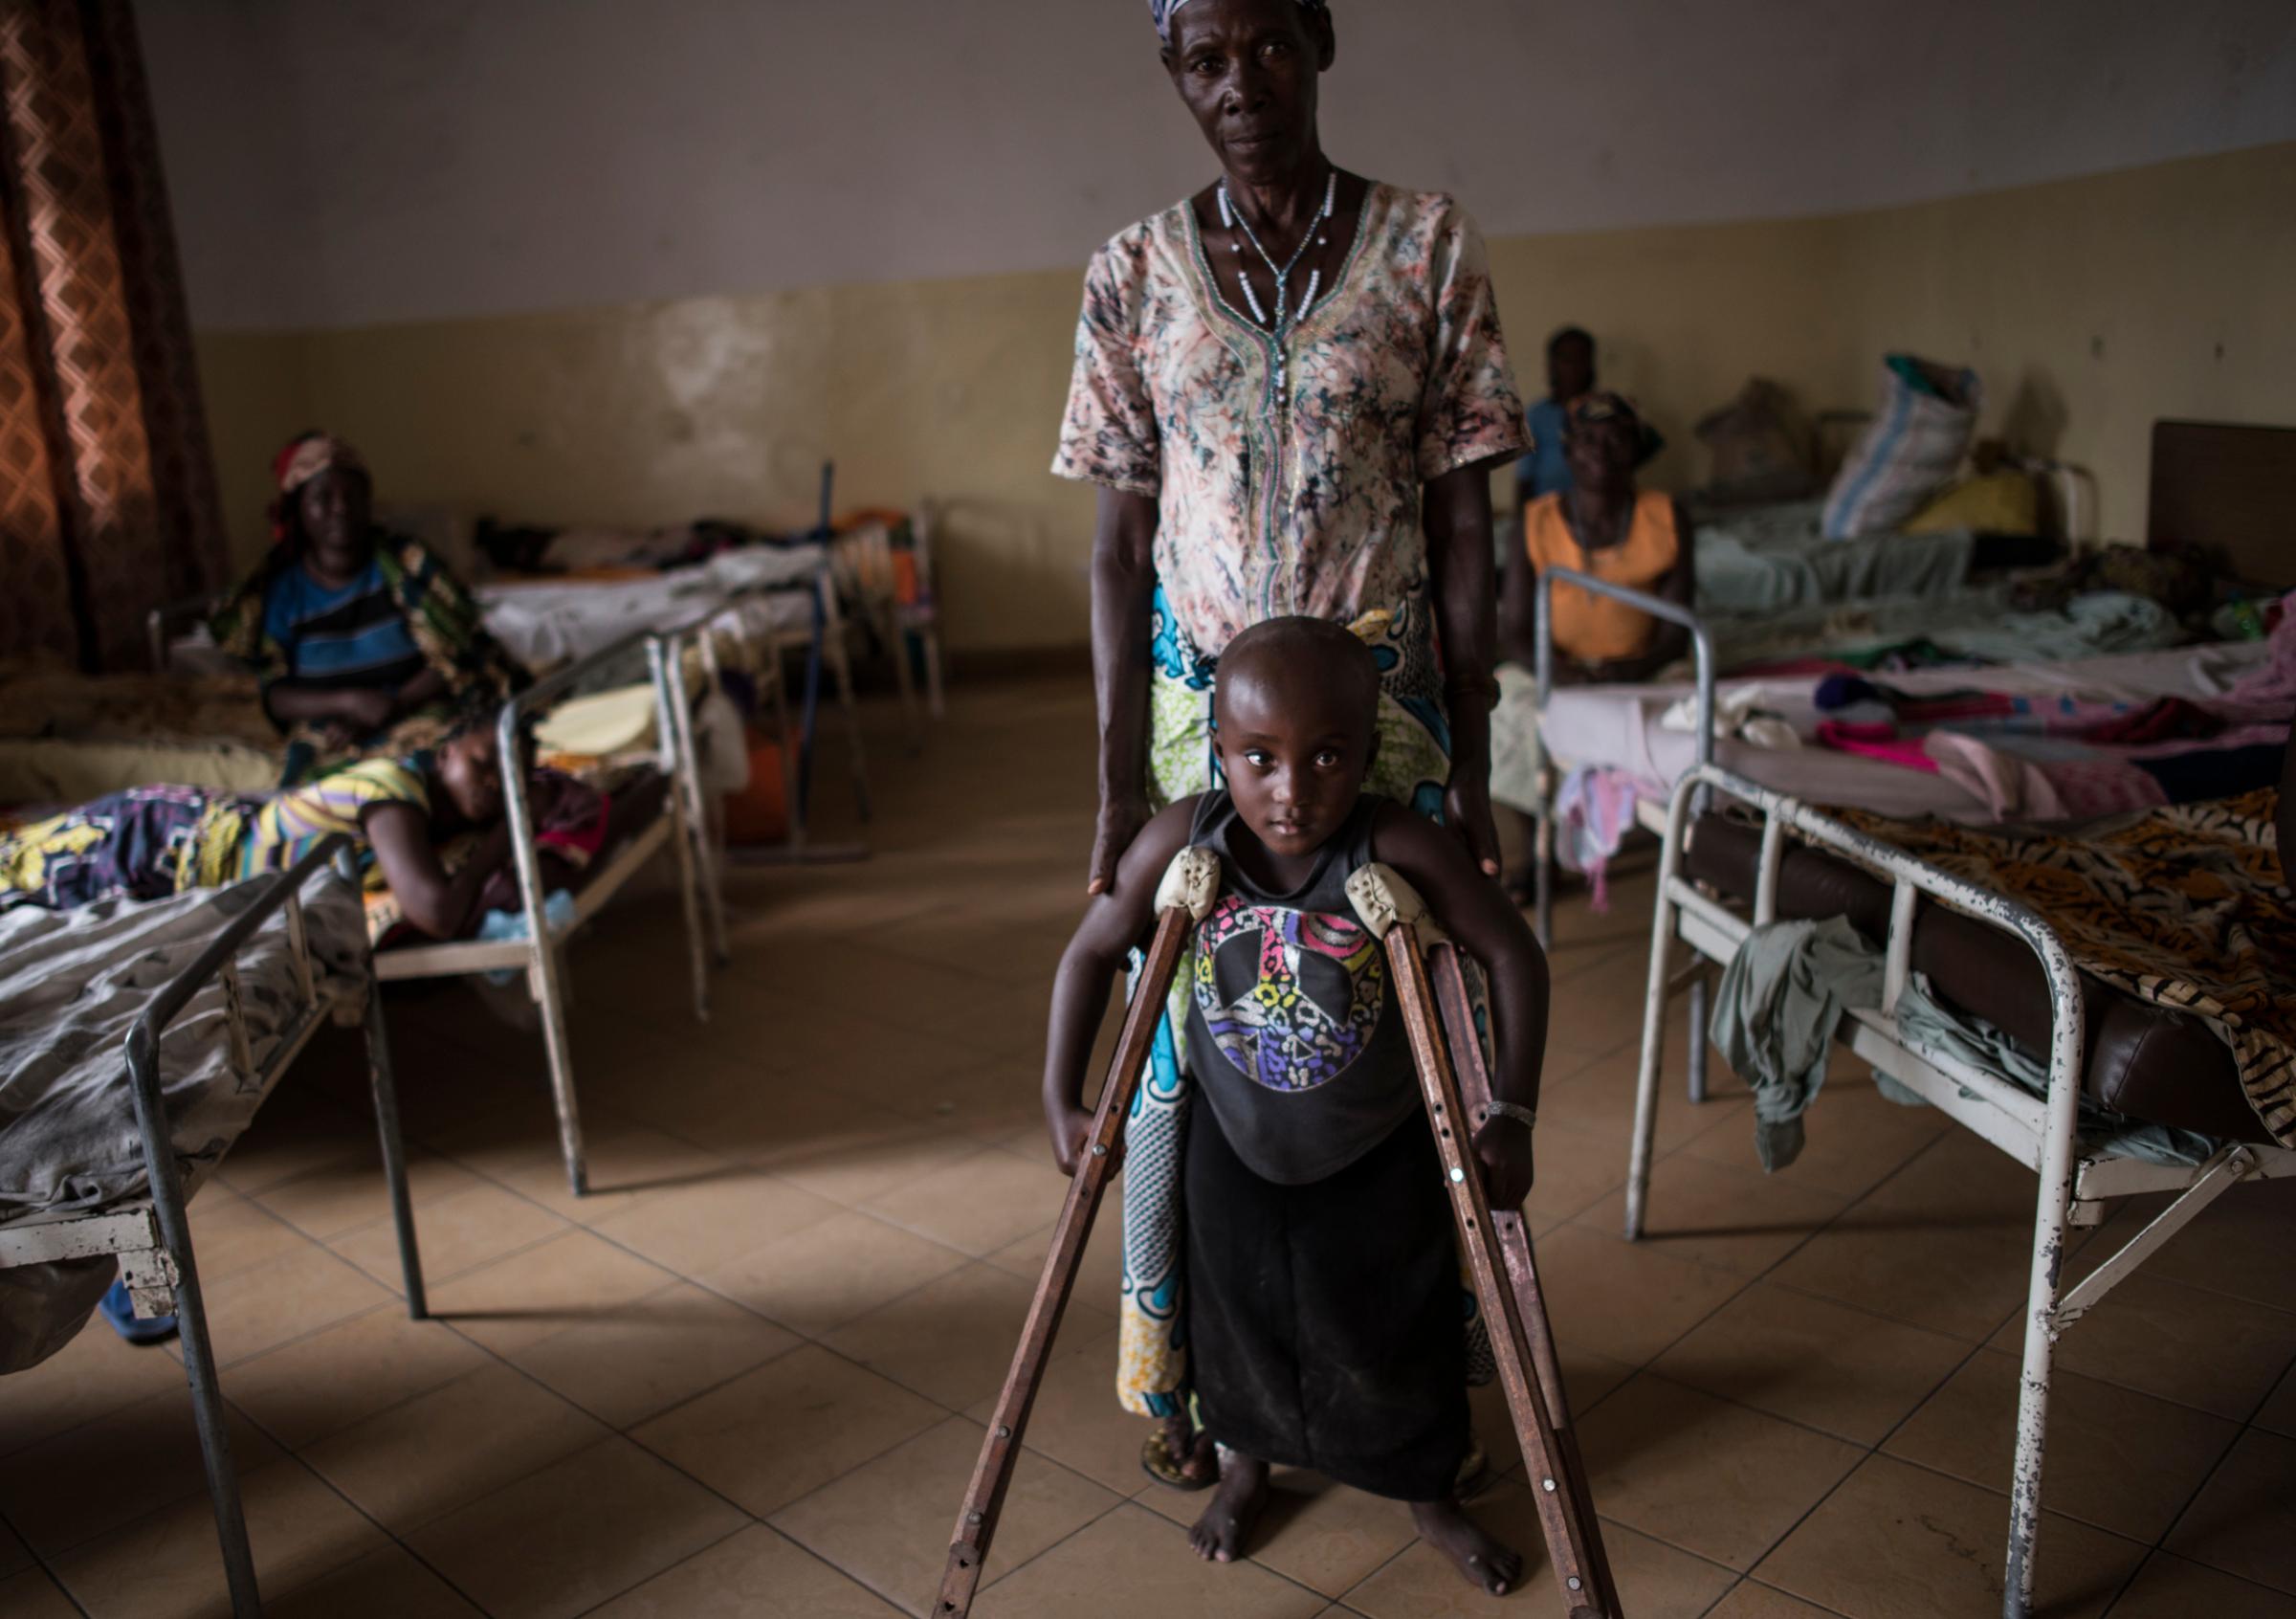 Kanyere Neema, 7, with her grandmother, Ndahondi Domina, 53, in the Heal Africa hospital in Goma, the Democratic Republic of Congo, Dec. 5, 2015. Two years prior, Kanyere's village of Ishasha was attacked by armed men, and her parents were killed in front of her. She was raped so many times by different men that she was left paralyzed, and stopped speaking.